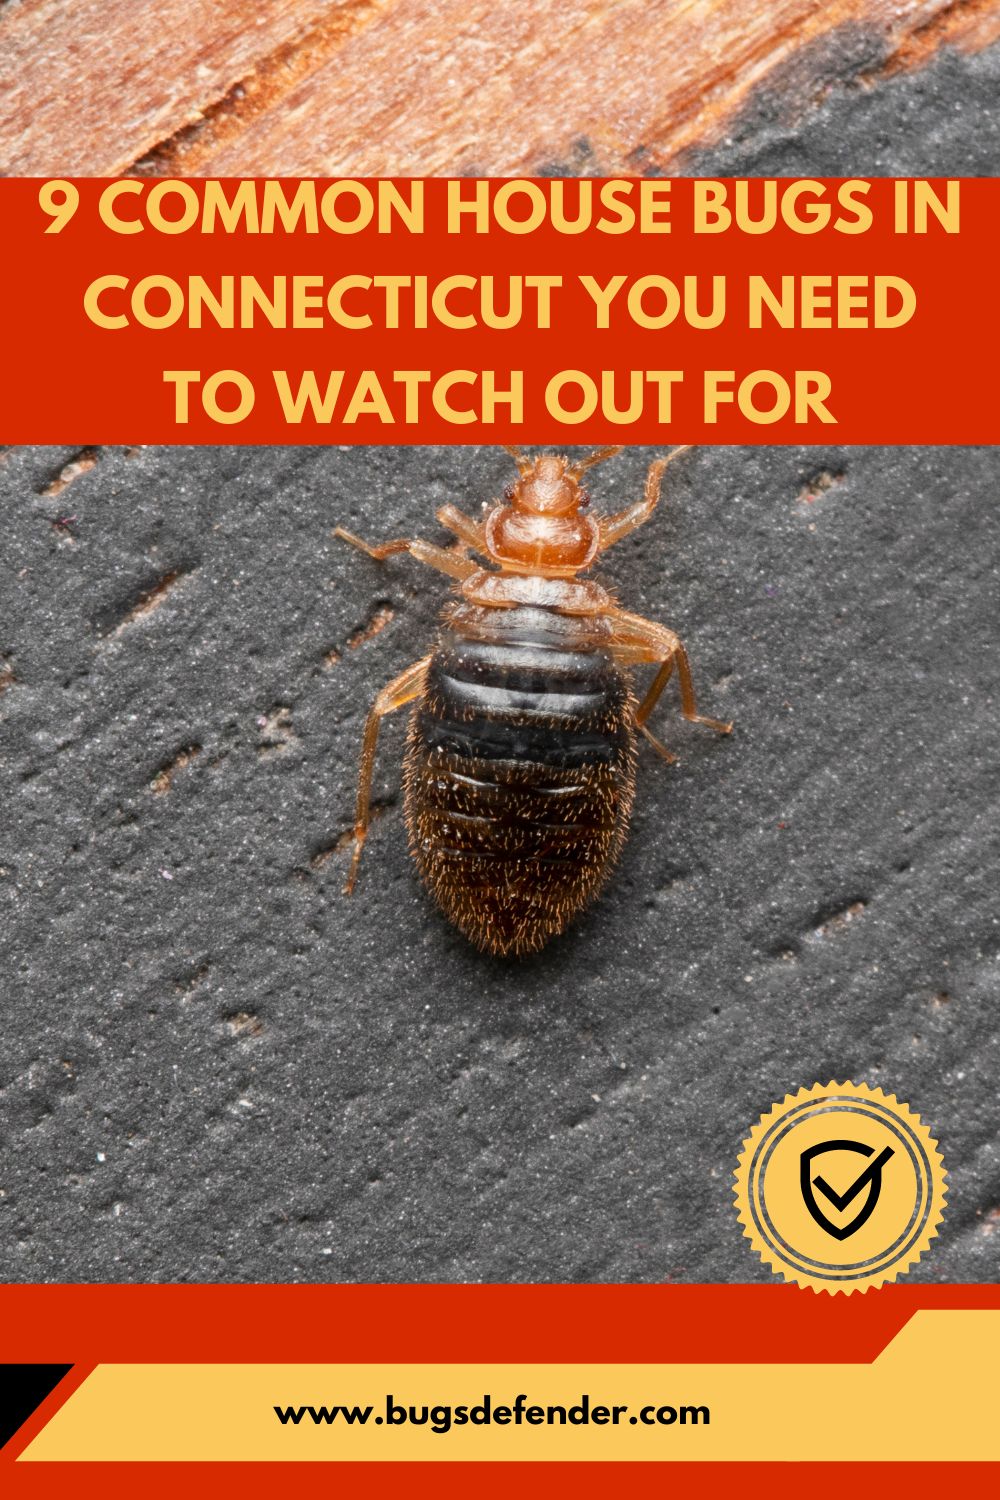 9 Common House Bugs In Connecticut You Need To Watch Out For pin 2